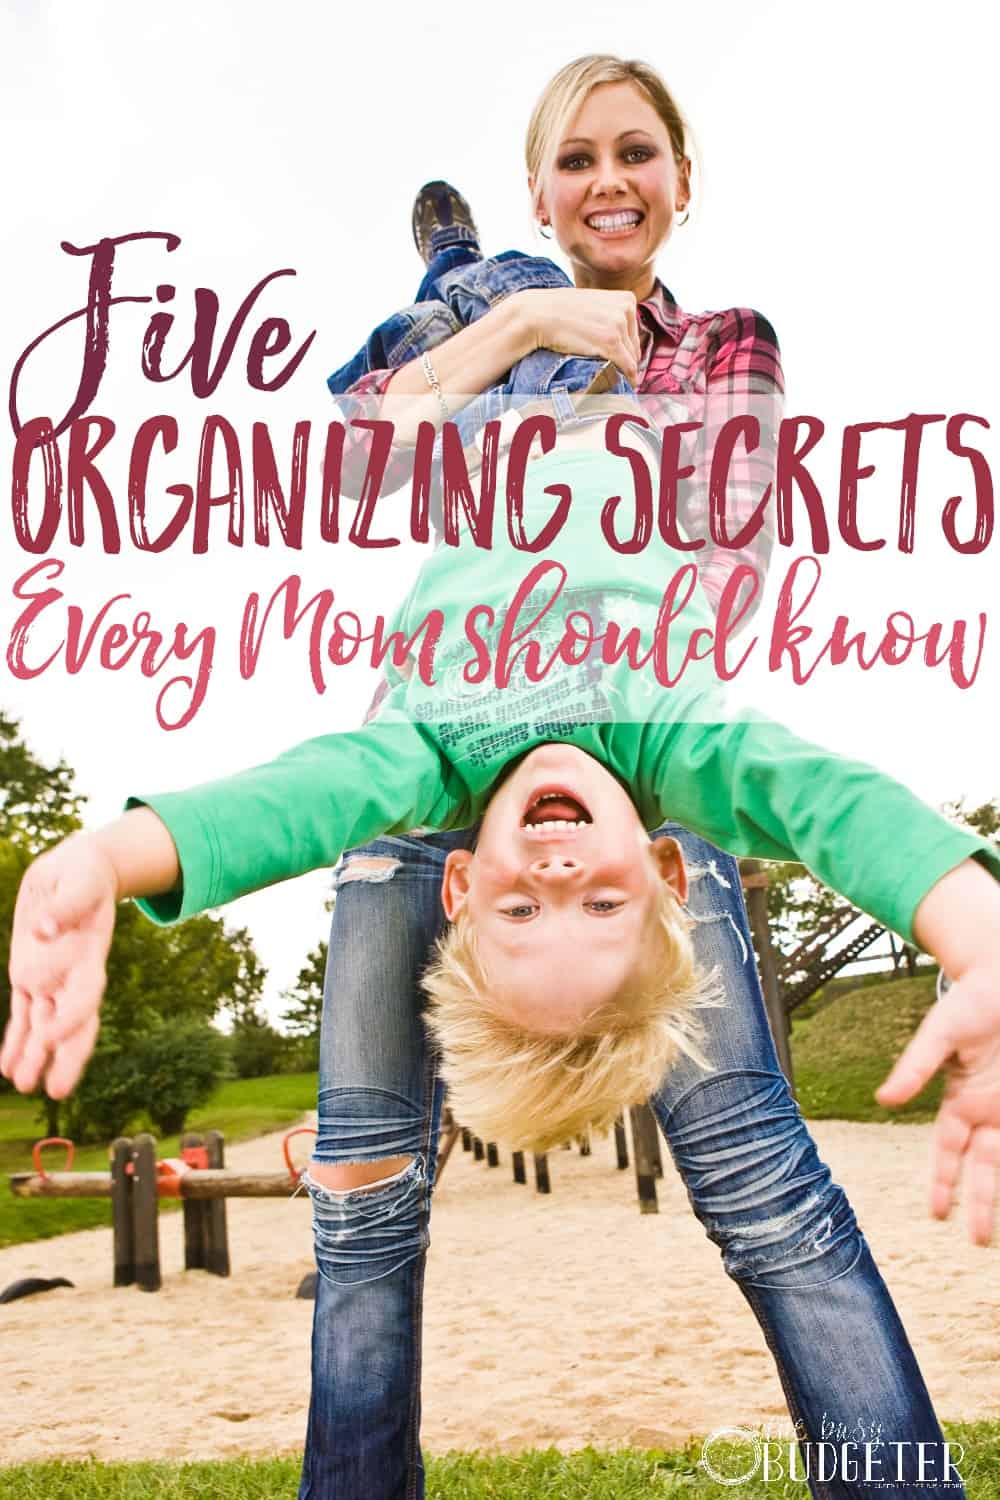 5 Organizing Secrets Every Mom Should Know. These organizing ideas actually work! I already do two of them (#2 and #4) and they made a HUGE difference in my life. I'm going to star on the others right now! 